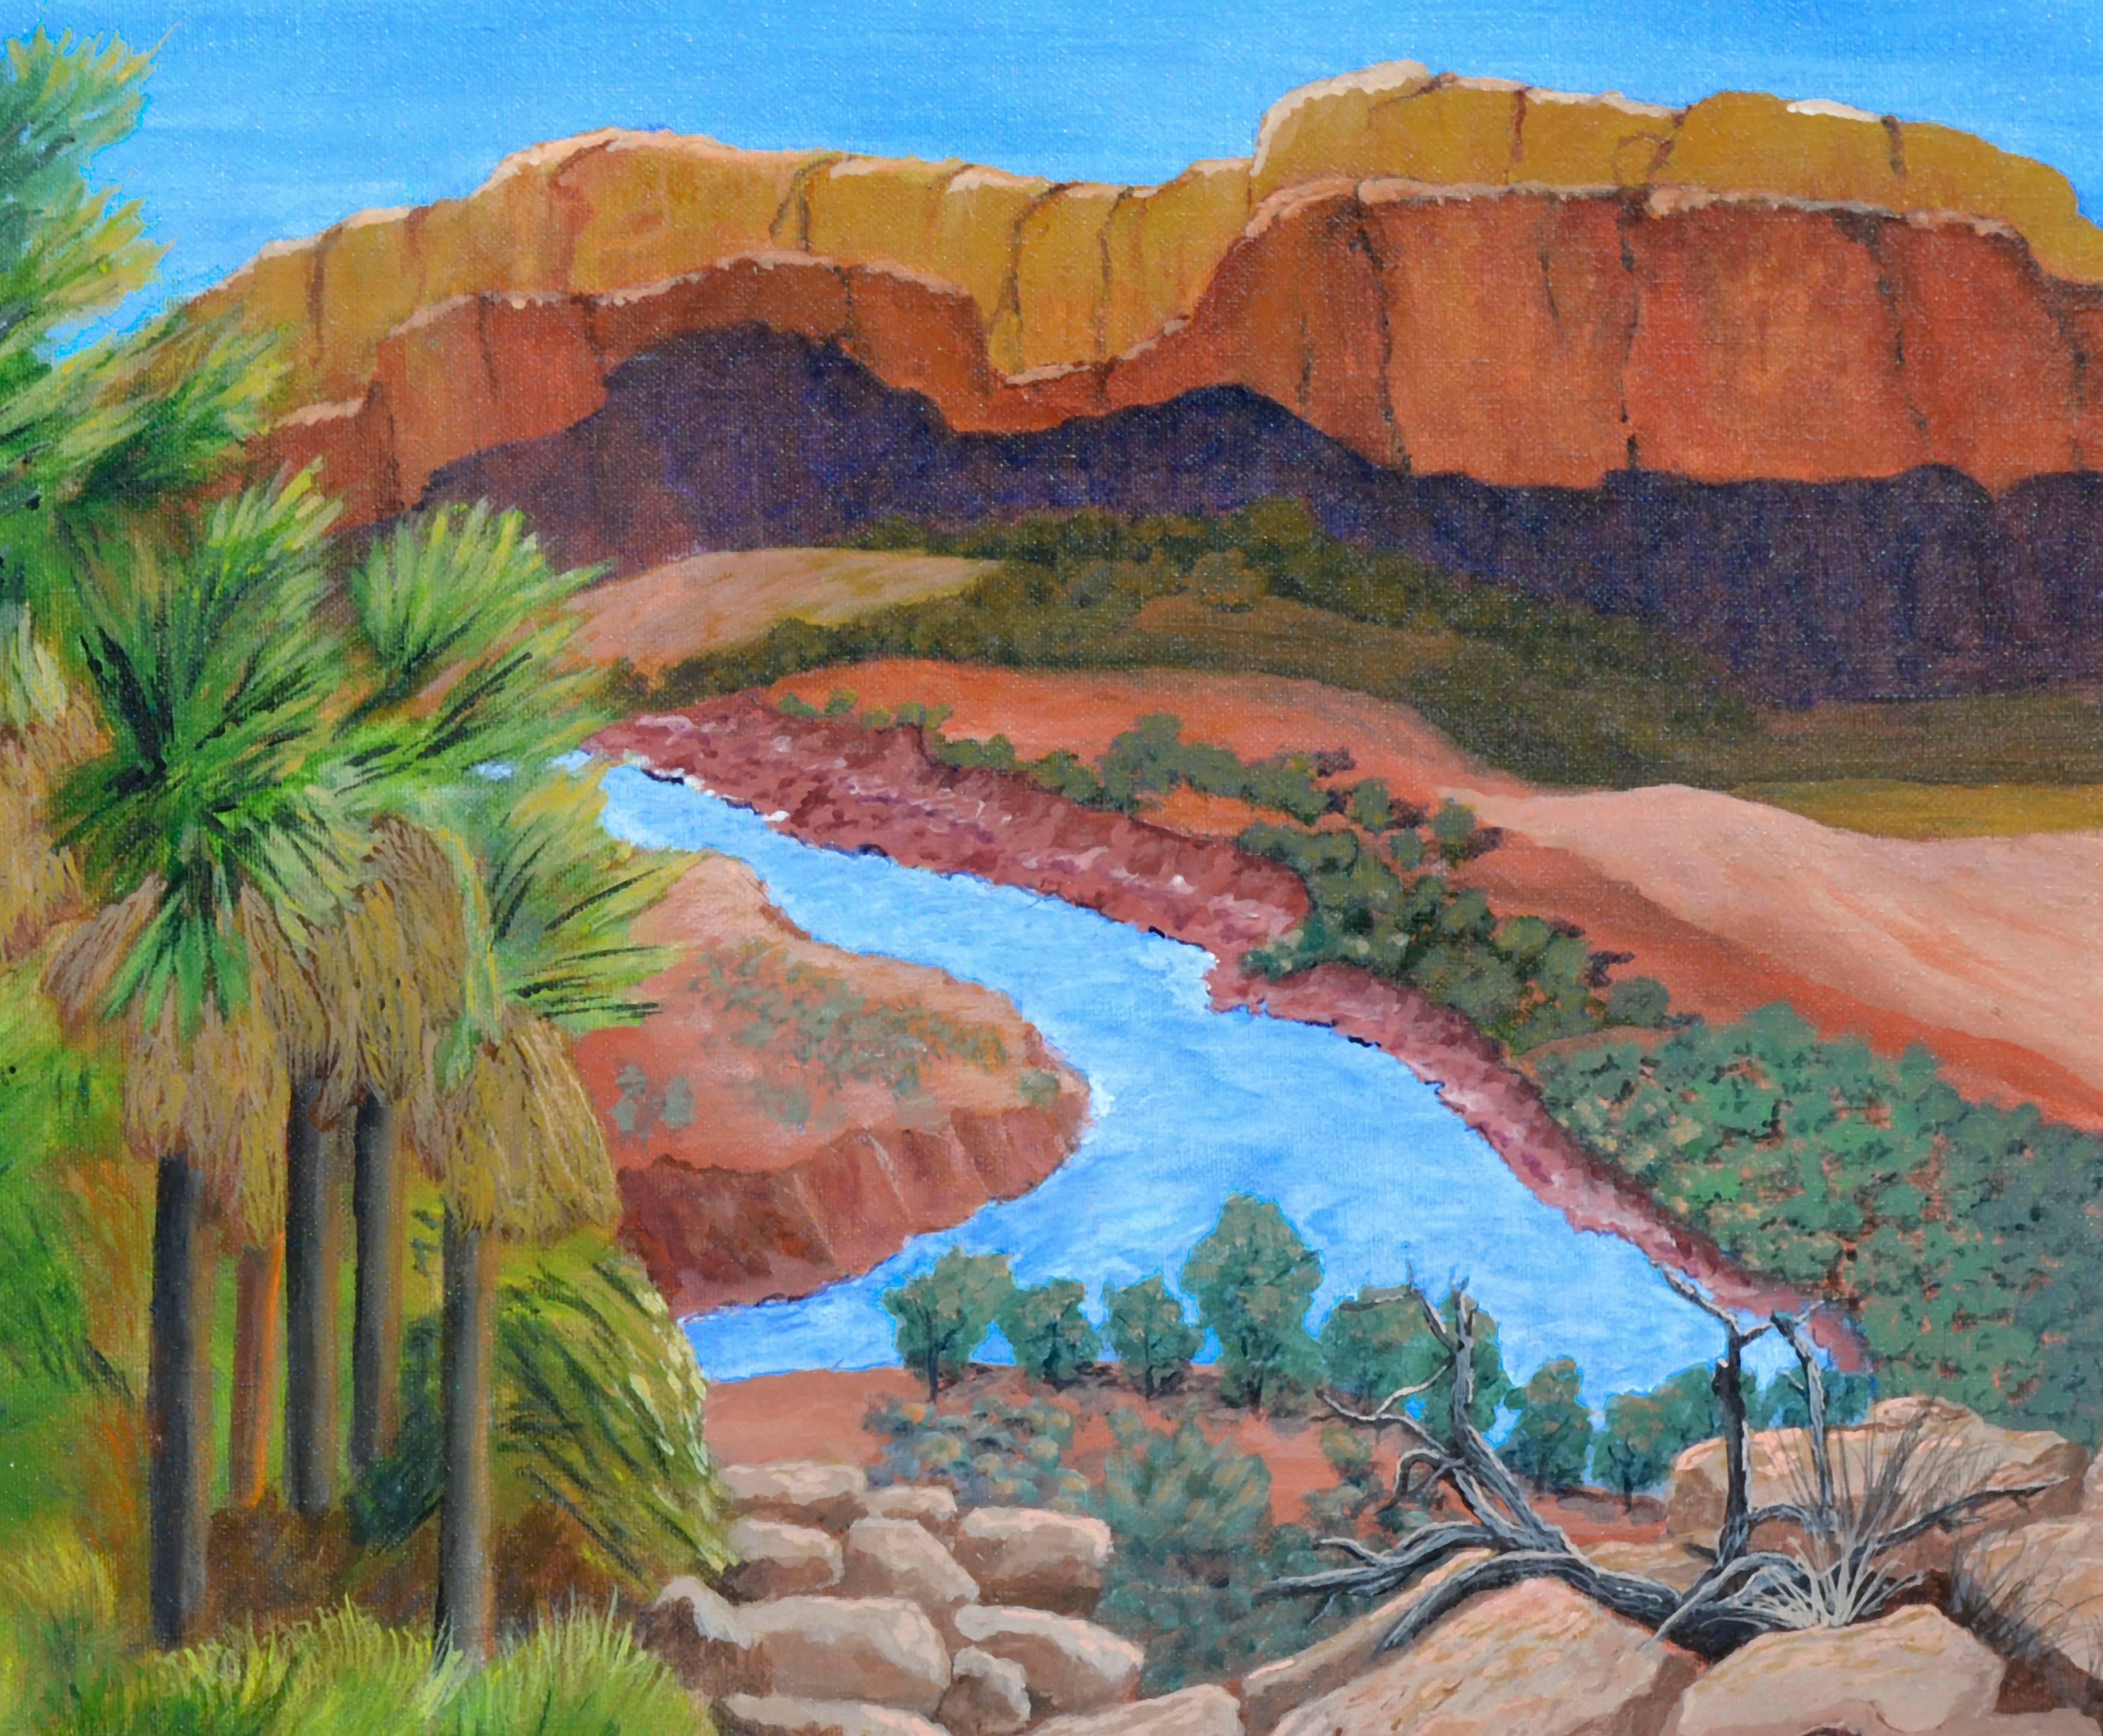 Canyon and River - Desert Landscape  - Painting by Clementine Cote